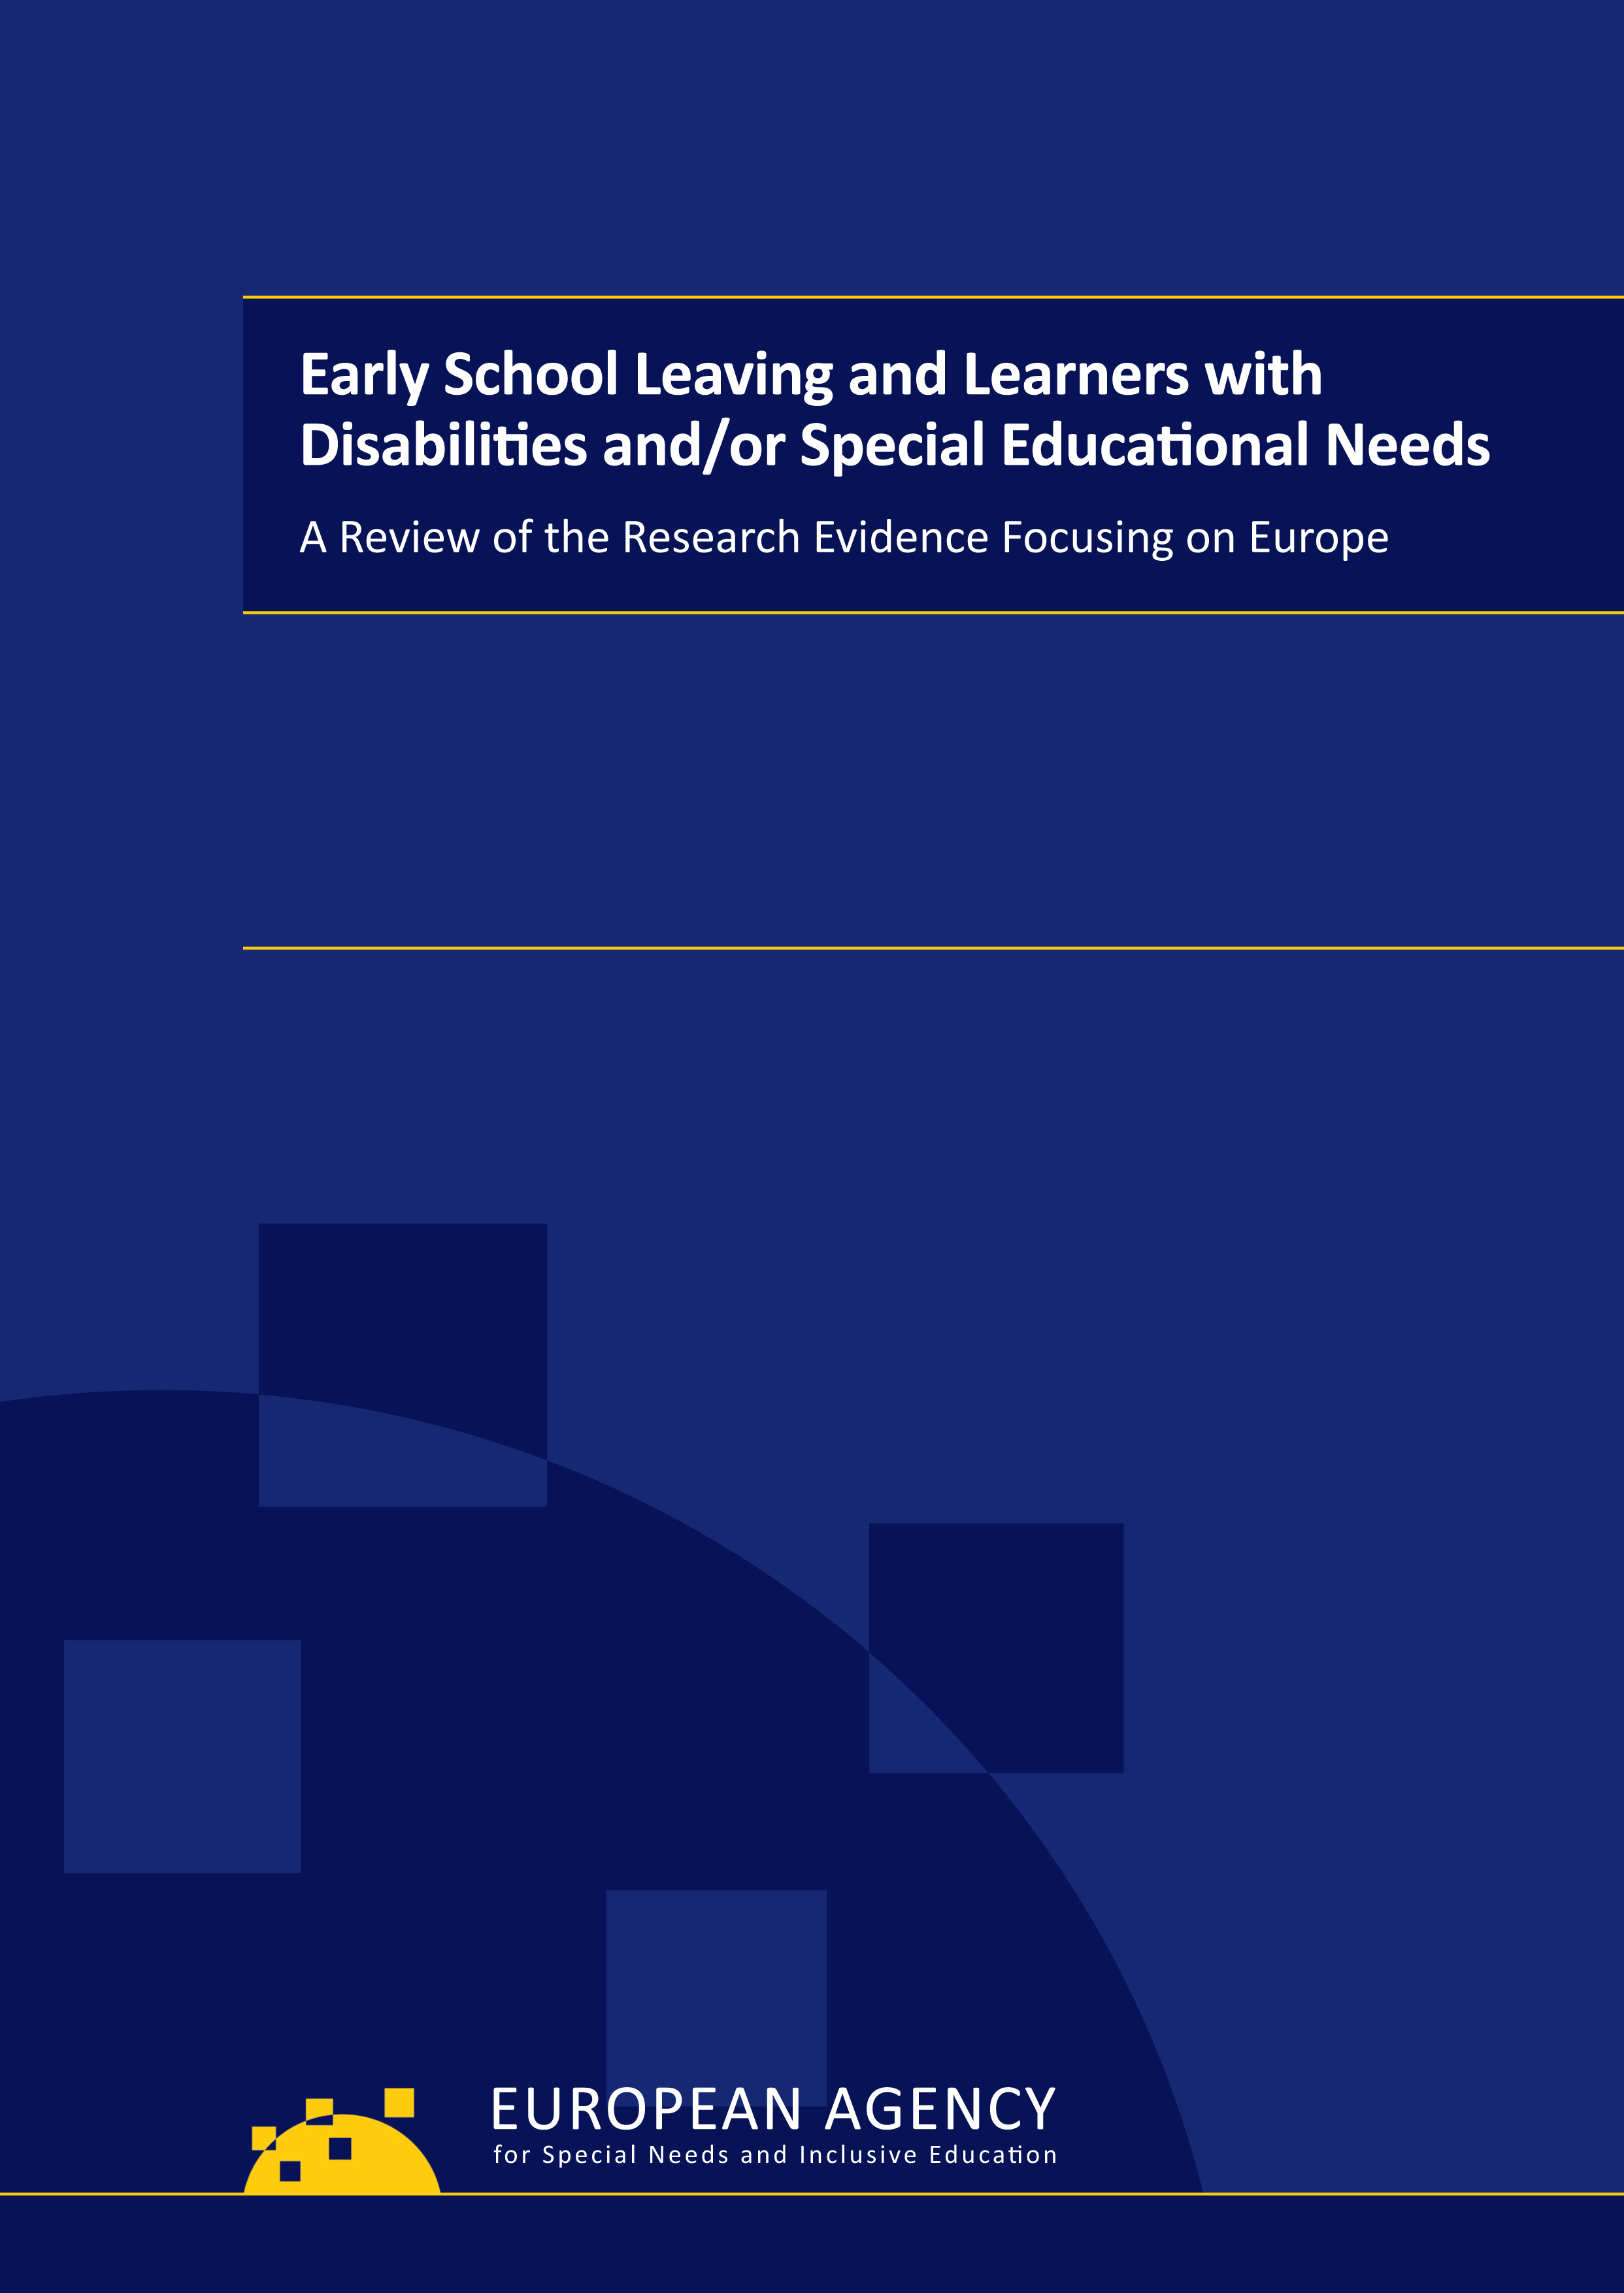 Early School Leaving and Learners with Disabilities and/or Special Educational Needs: A Review of the Research Evidence Focusing on Europe